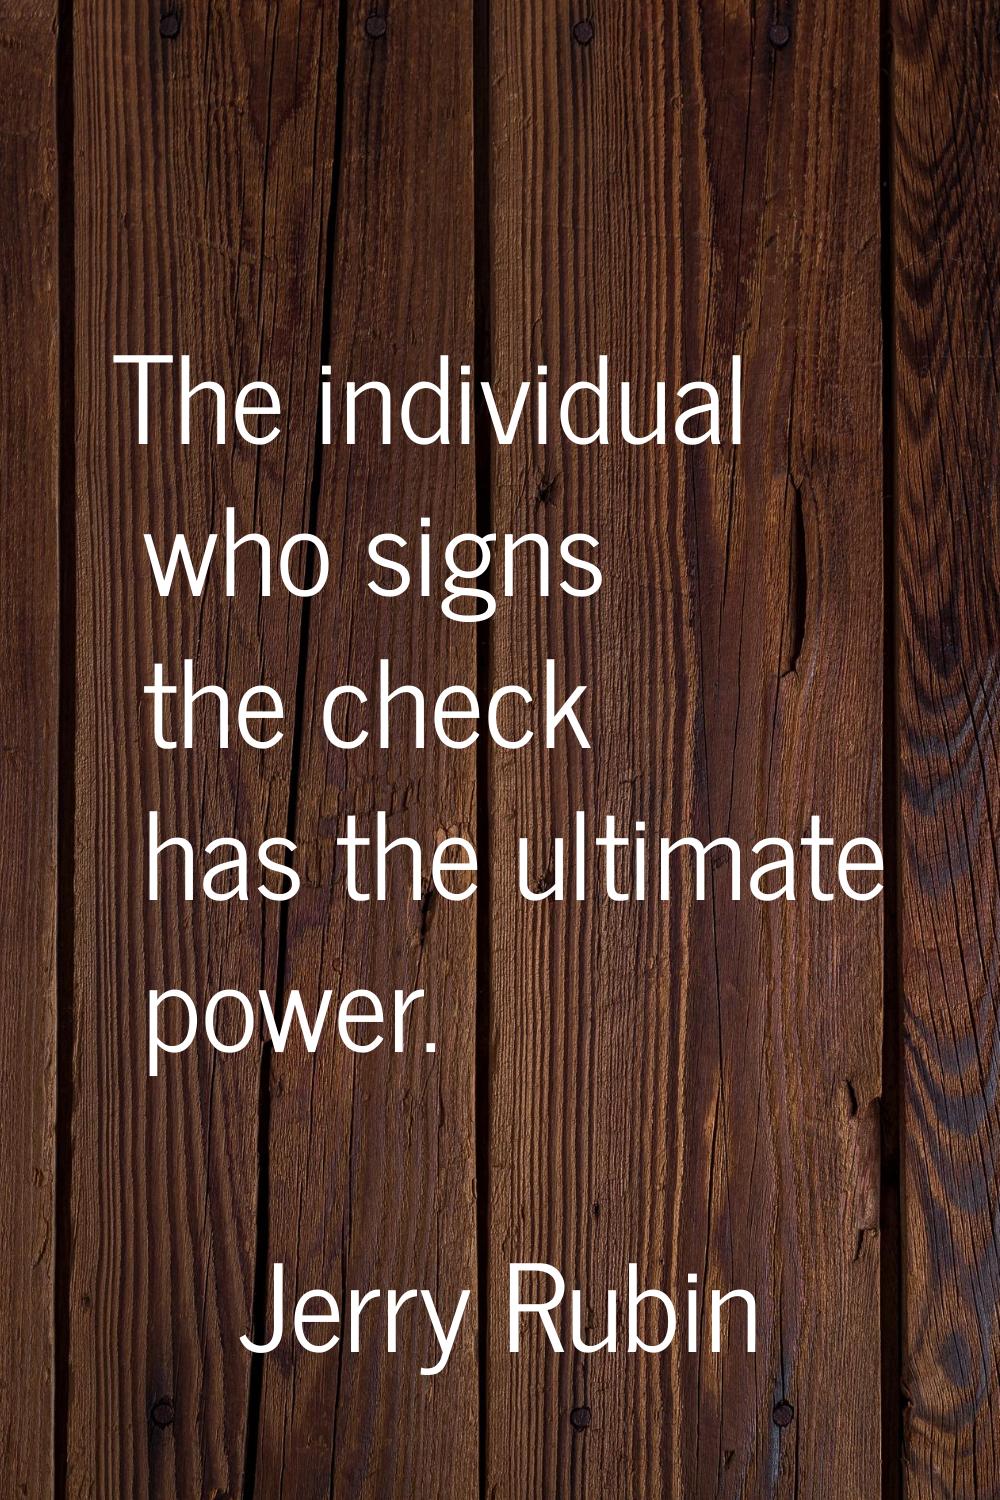 The individual who signs the check has the ultimate power.